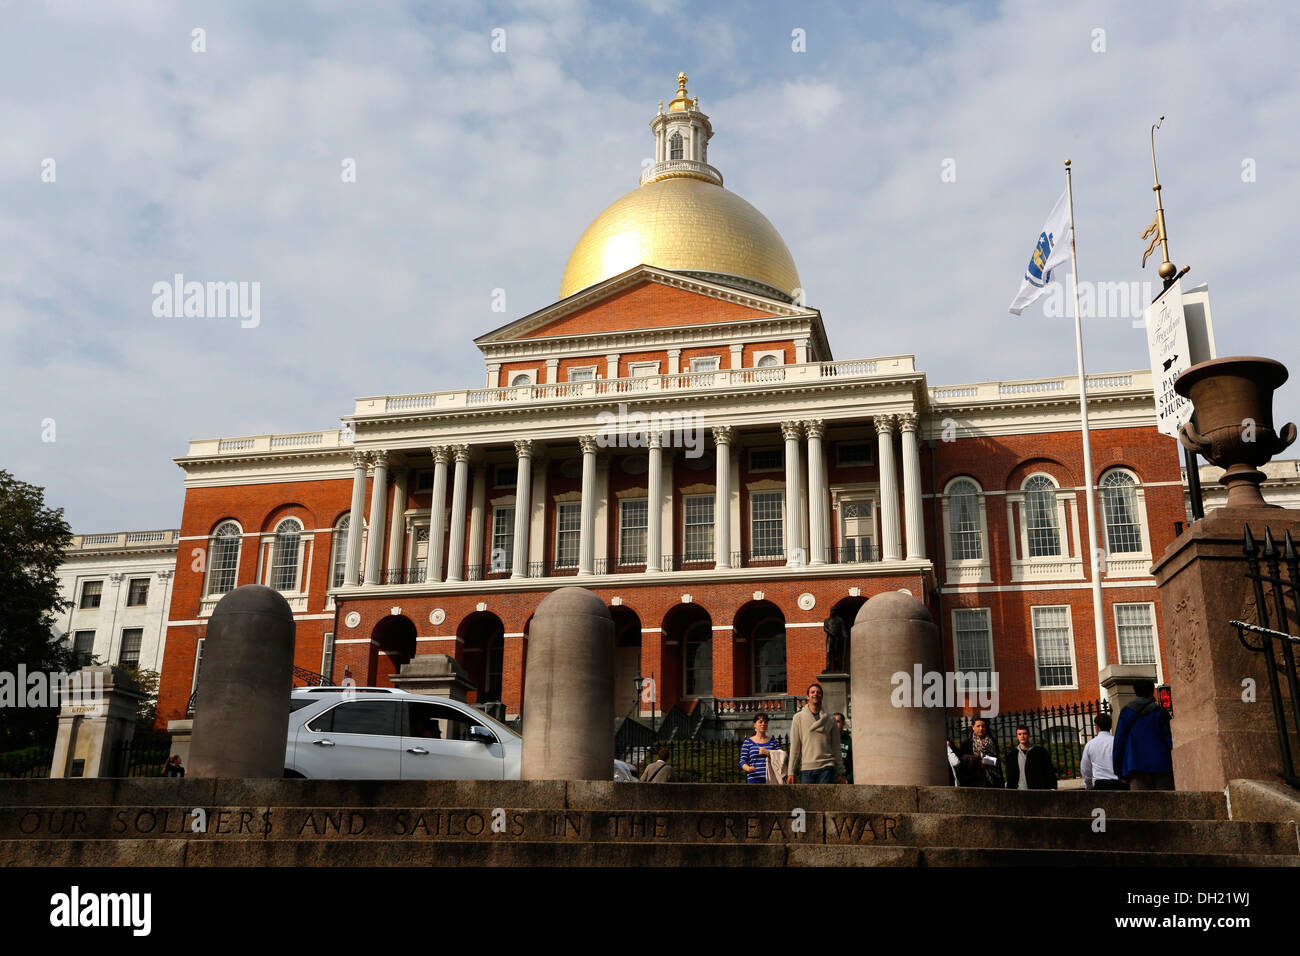 State House, Boston, Massachusetts, USA Banque D'Images